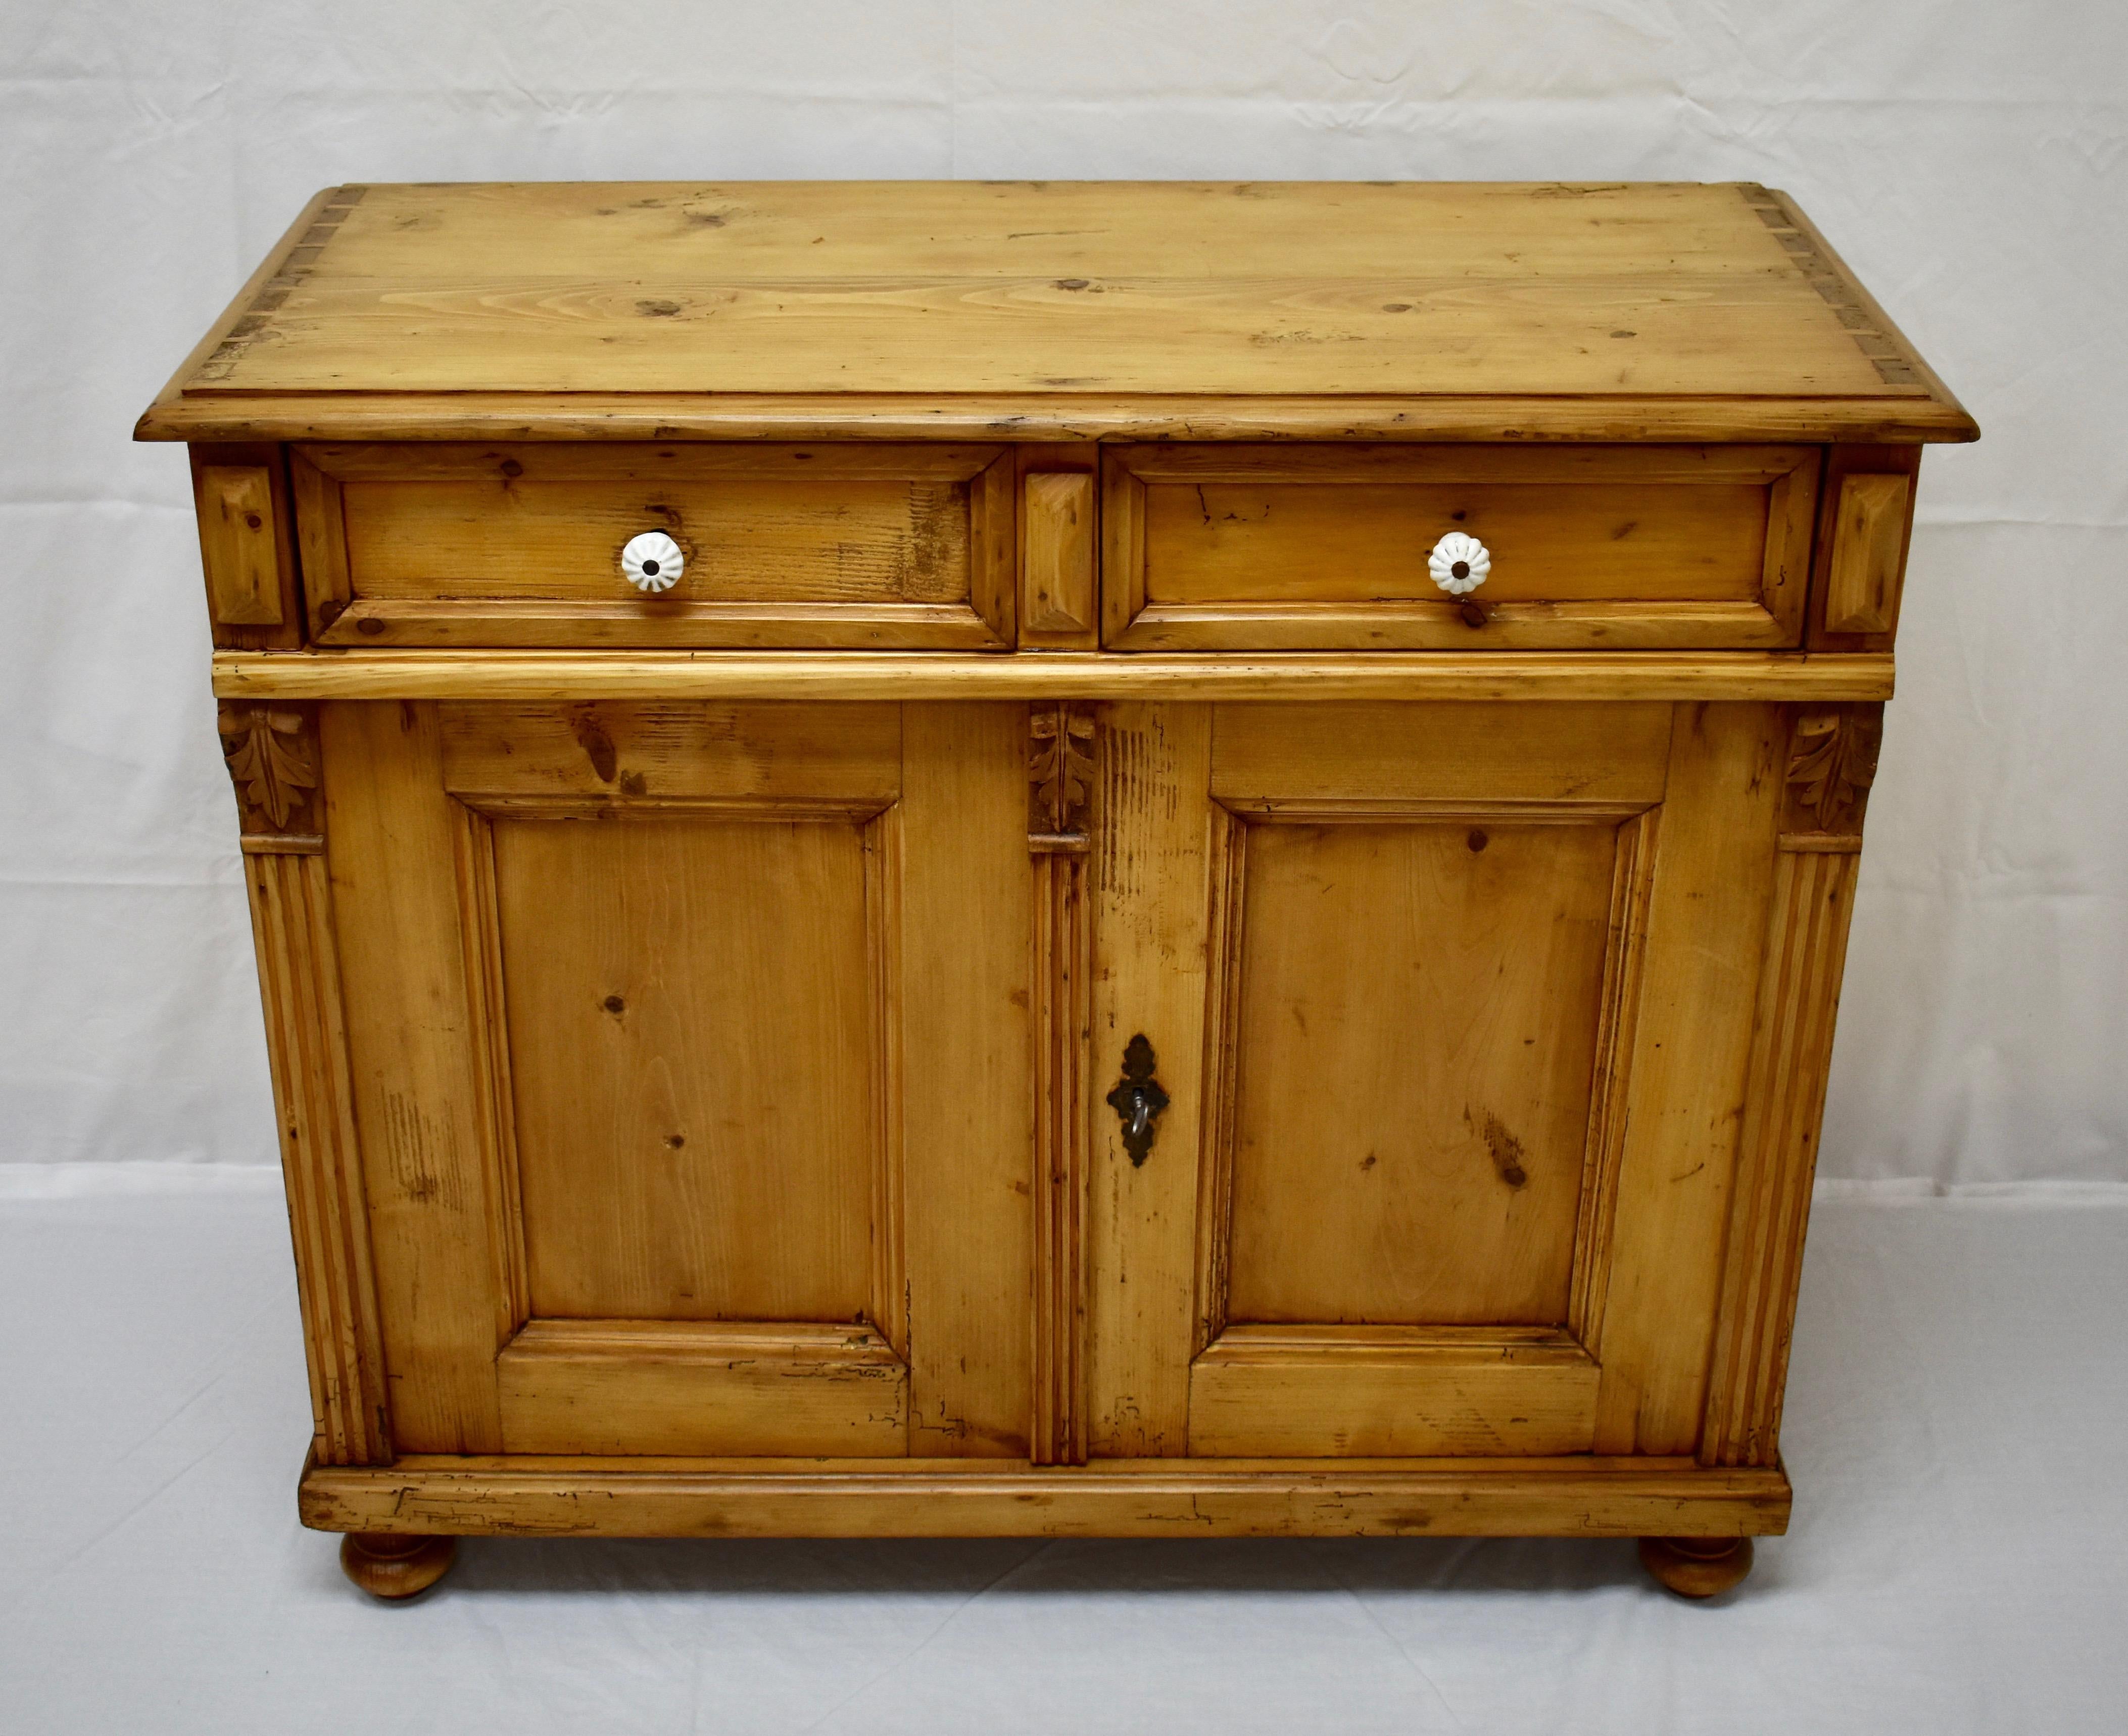 This is an extremely attractive and versatile two door, two drawer pine dresser base. The top shows half-exposed dovetails bordered by a step-down applied molding.
Two lap-jointed drawers with ceramic knobs sit above two flat-paneled doors, flanked